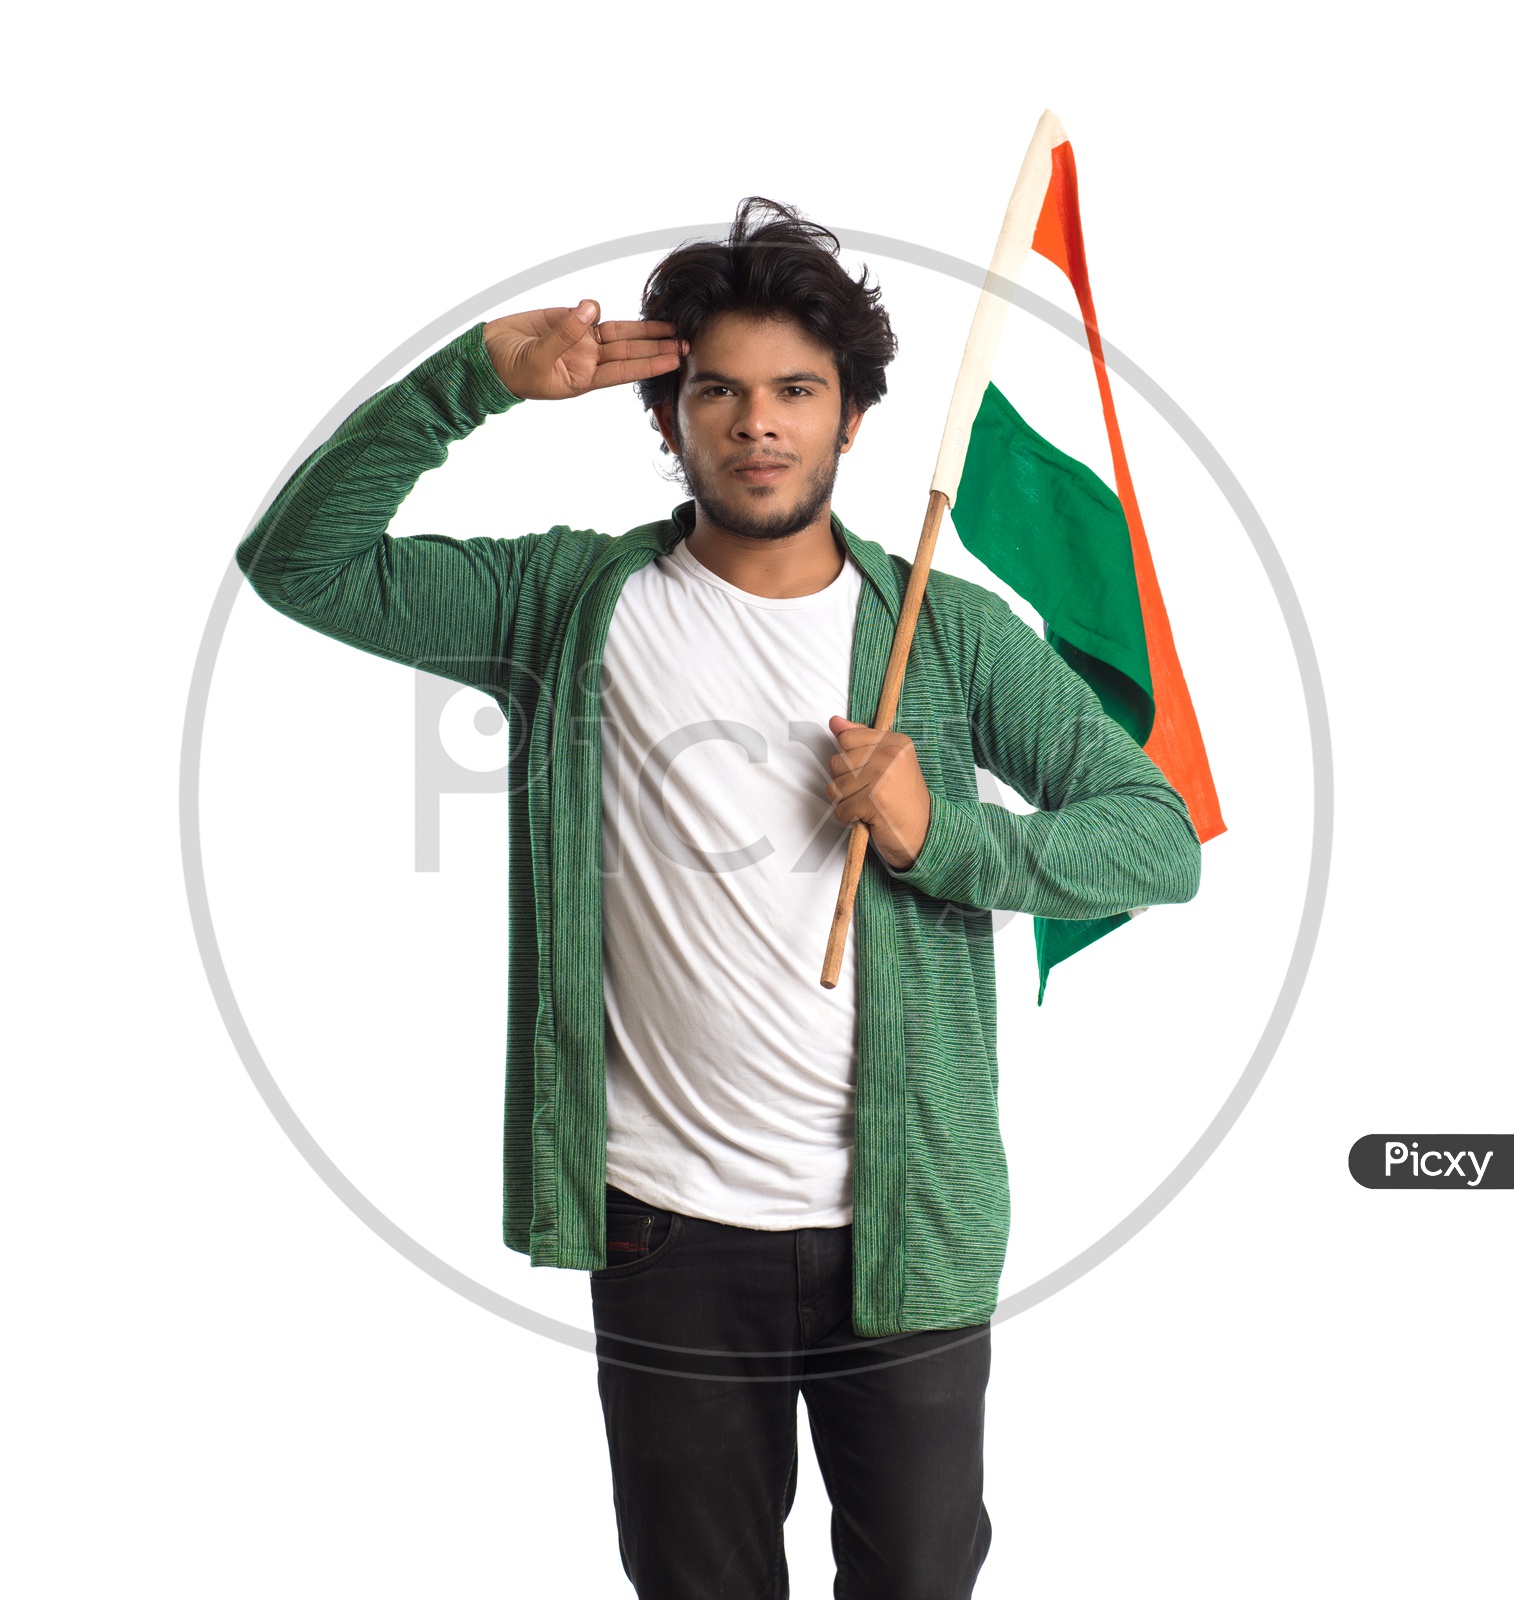 A Young Indian man Holding  Indian National Flag ( Tri Color )  In Hands And With a  Saluting Pose  Over a White Isolated Background